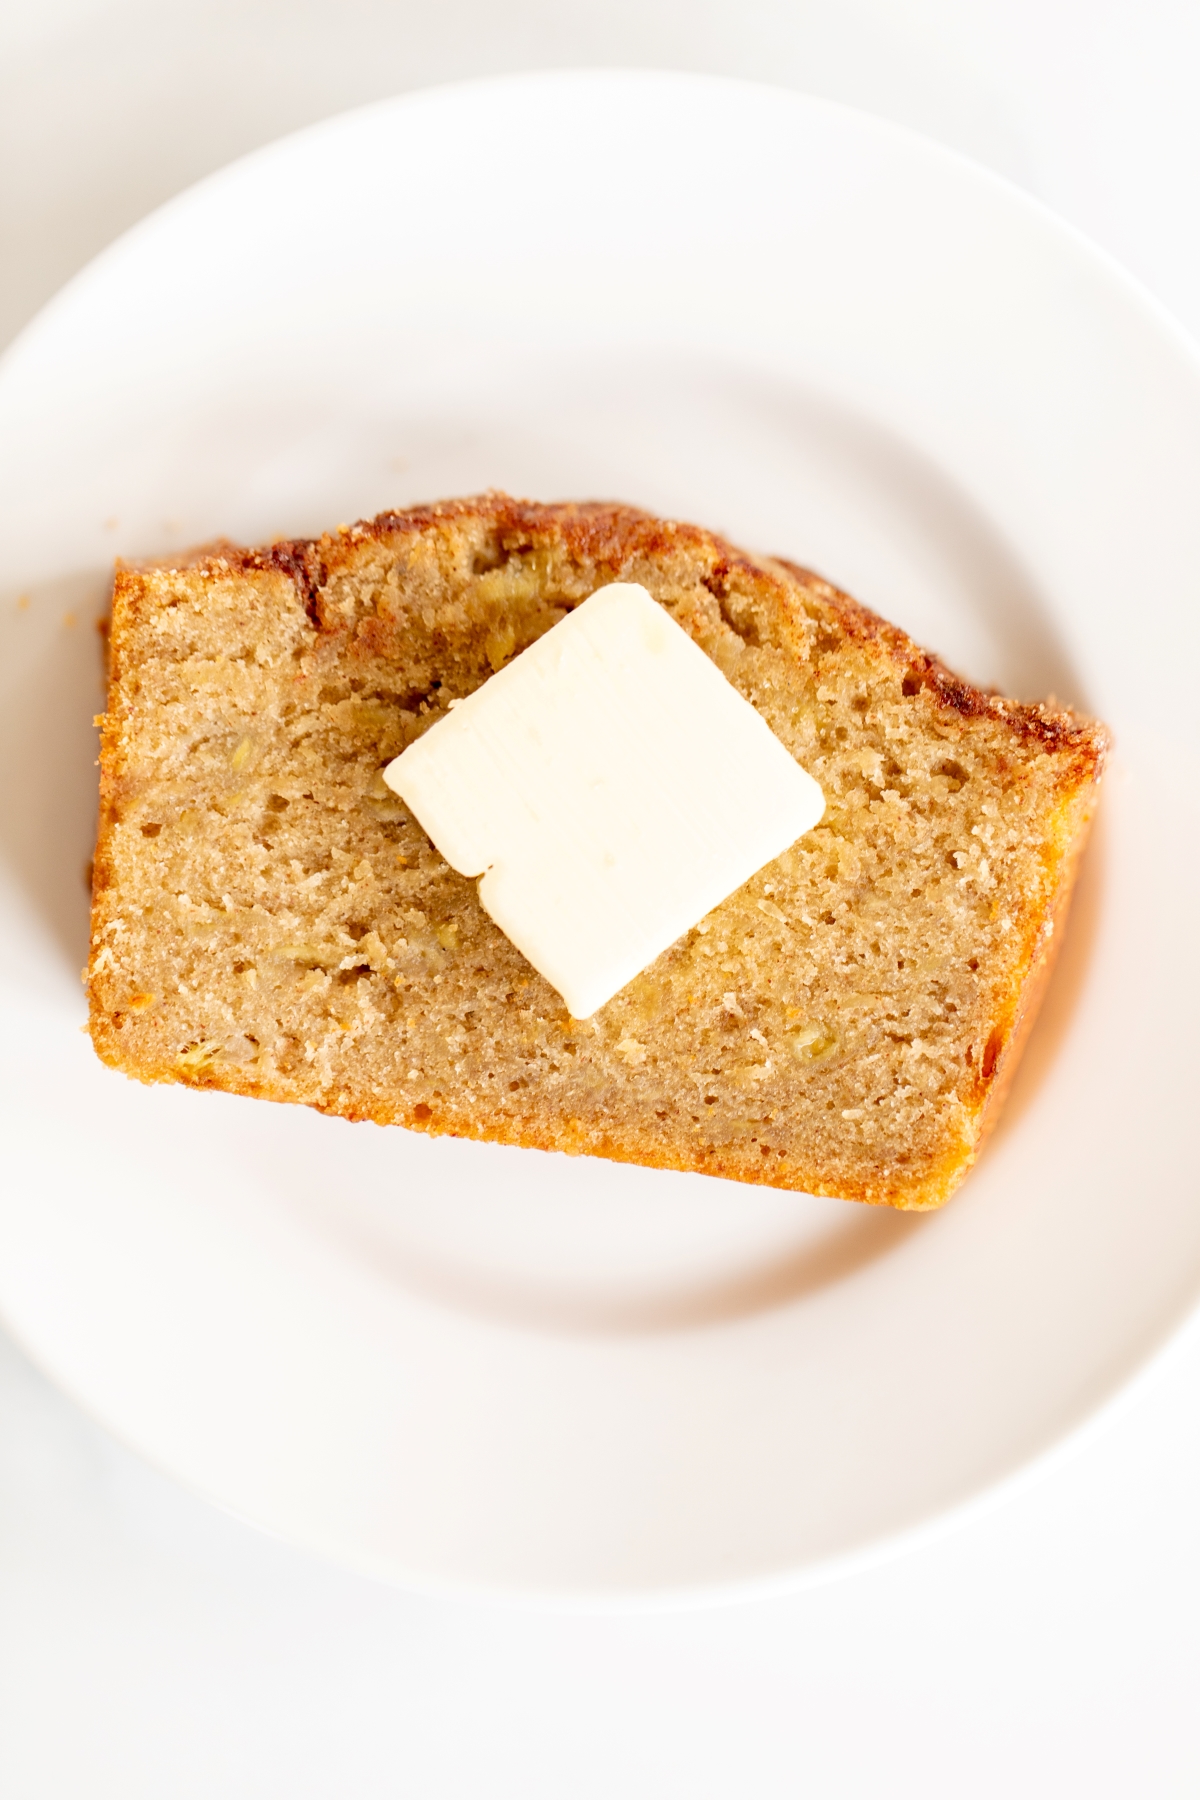 A slice of banana bread on a white plate, with a pat of butter